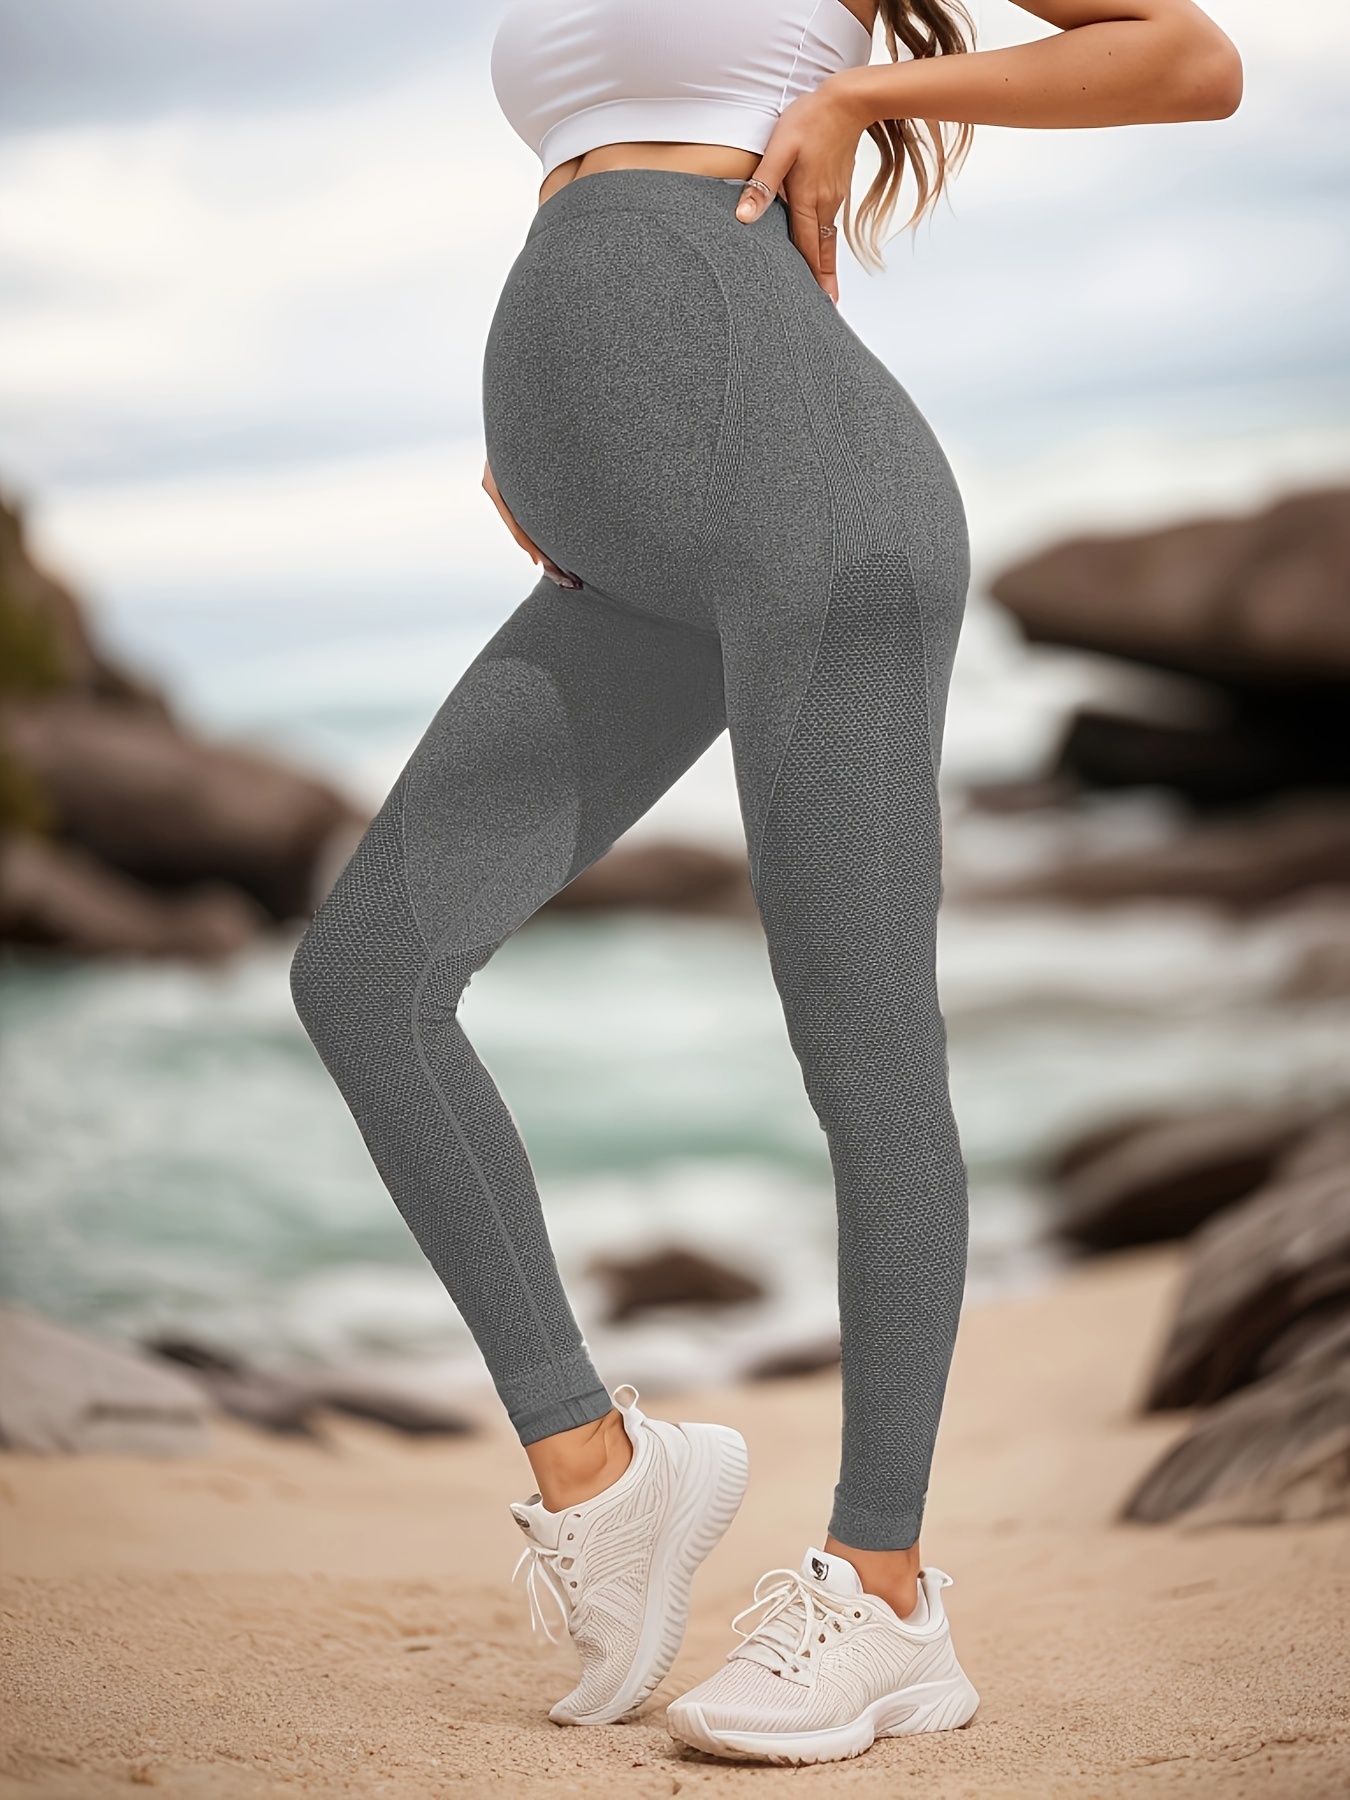 1pc High Waist Maternity Leggings For Autumn/winter, Stretchy, Breathable,  Seamless, Supportive, Perfect For Yoga & Daily Life